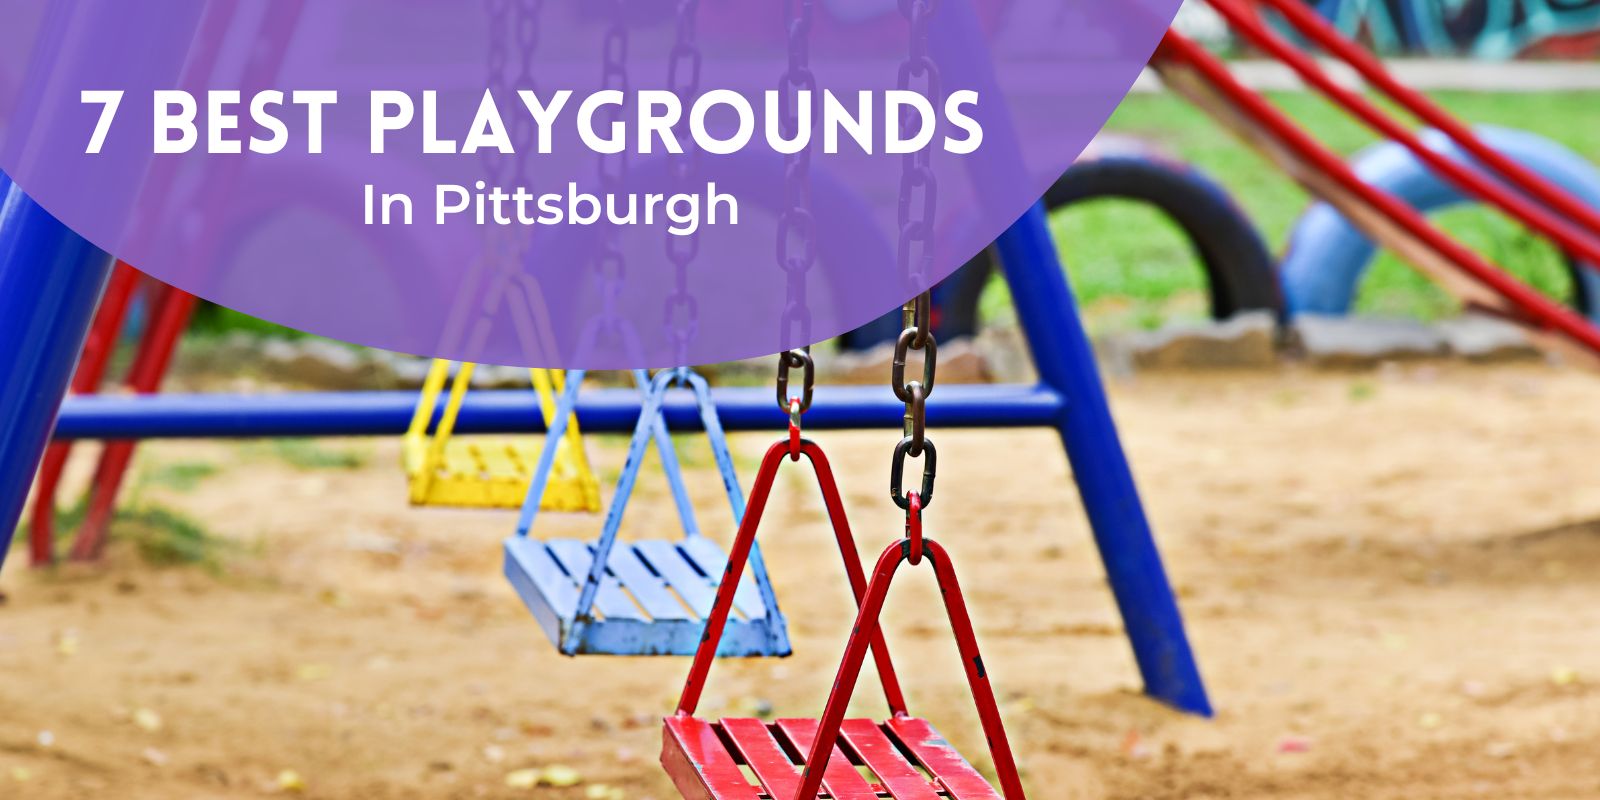 7 Best Playgrounds In Pittsburgh